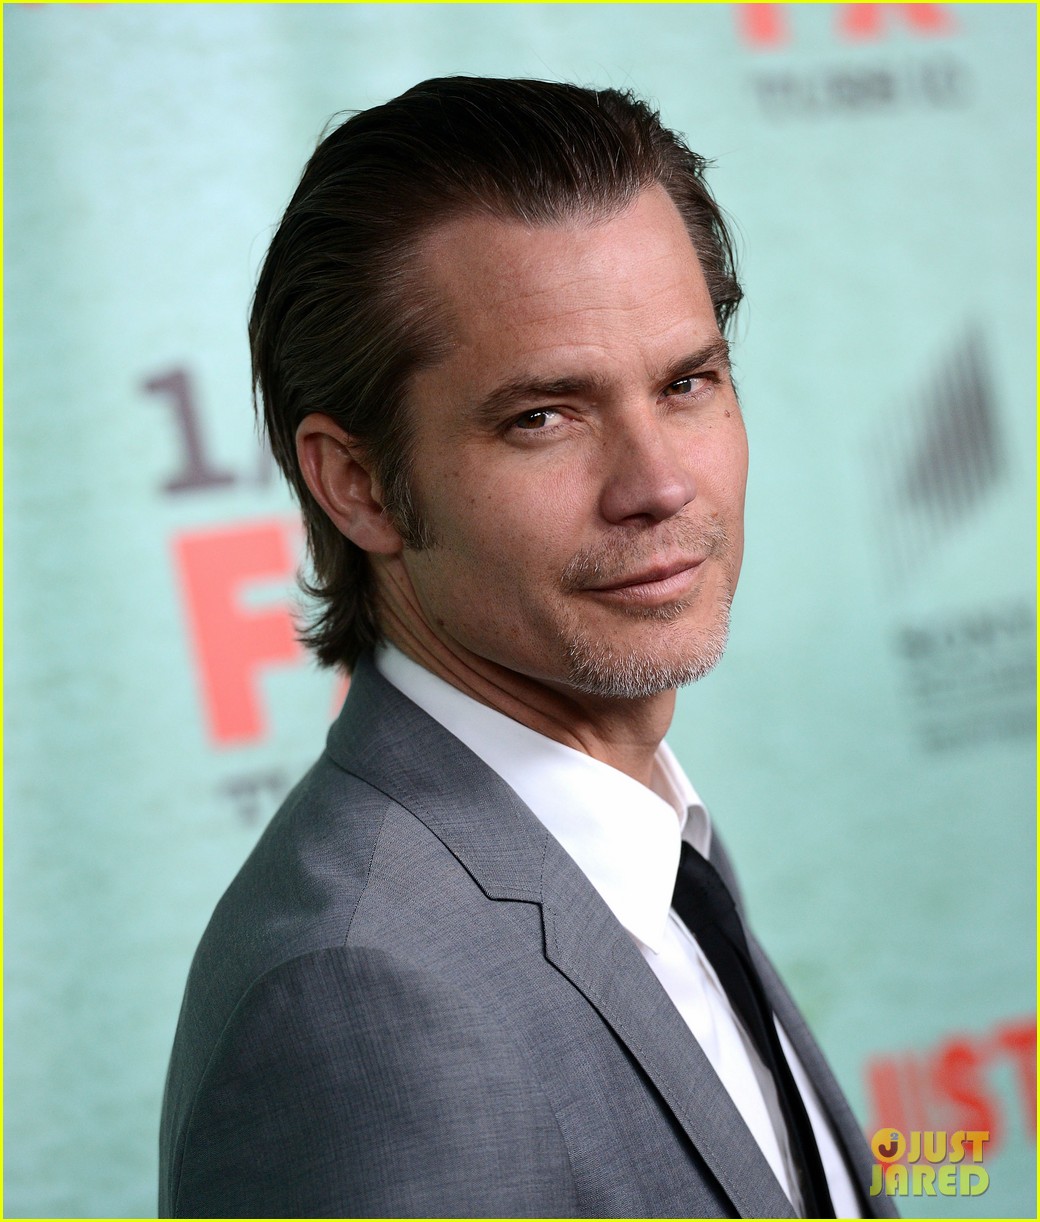 timothy-olyphant-wallpapers